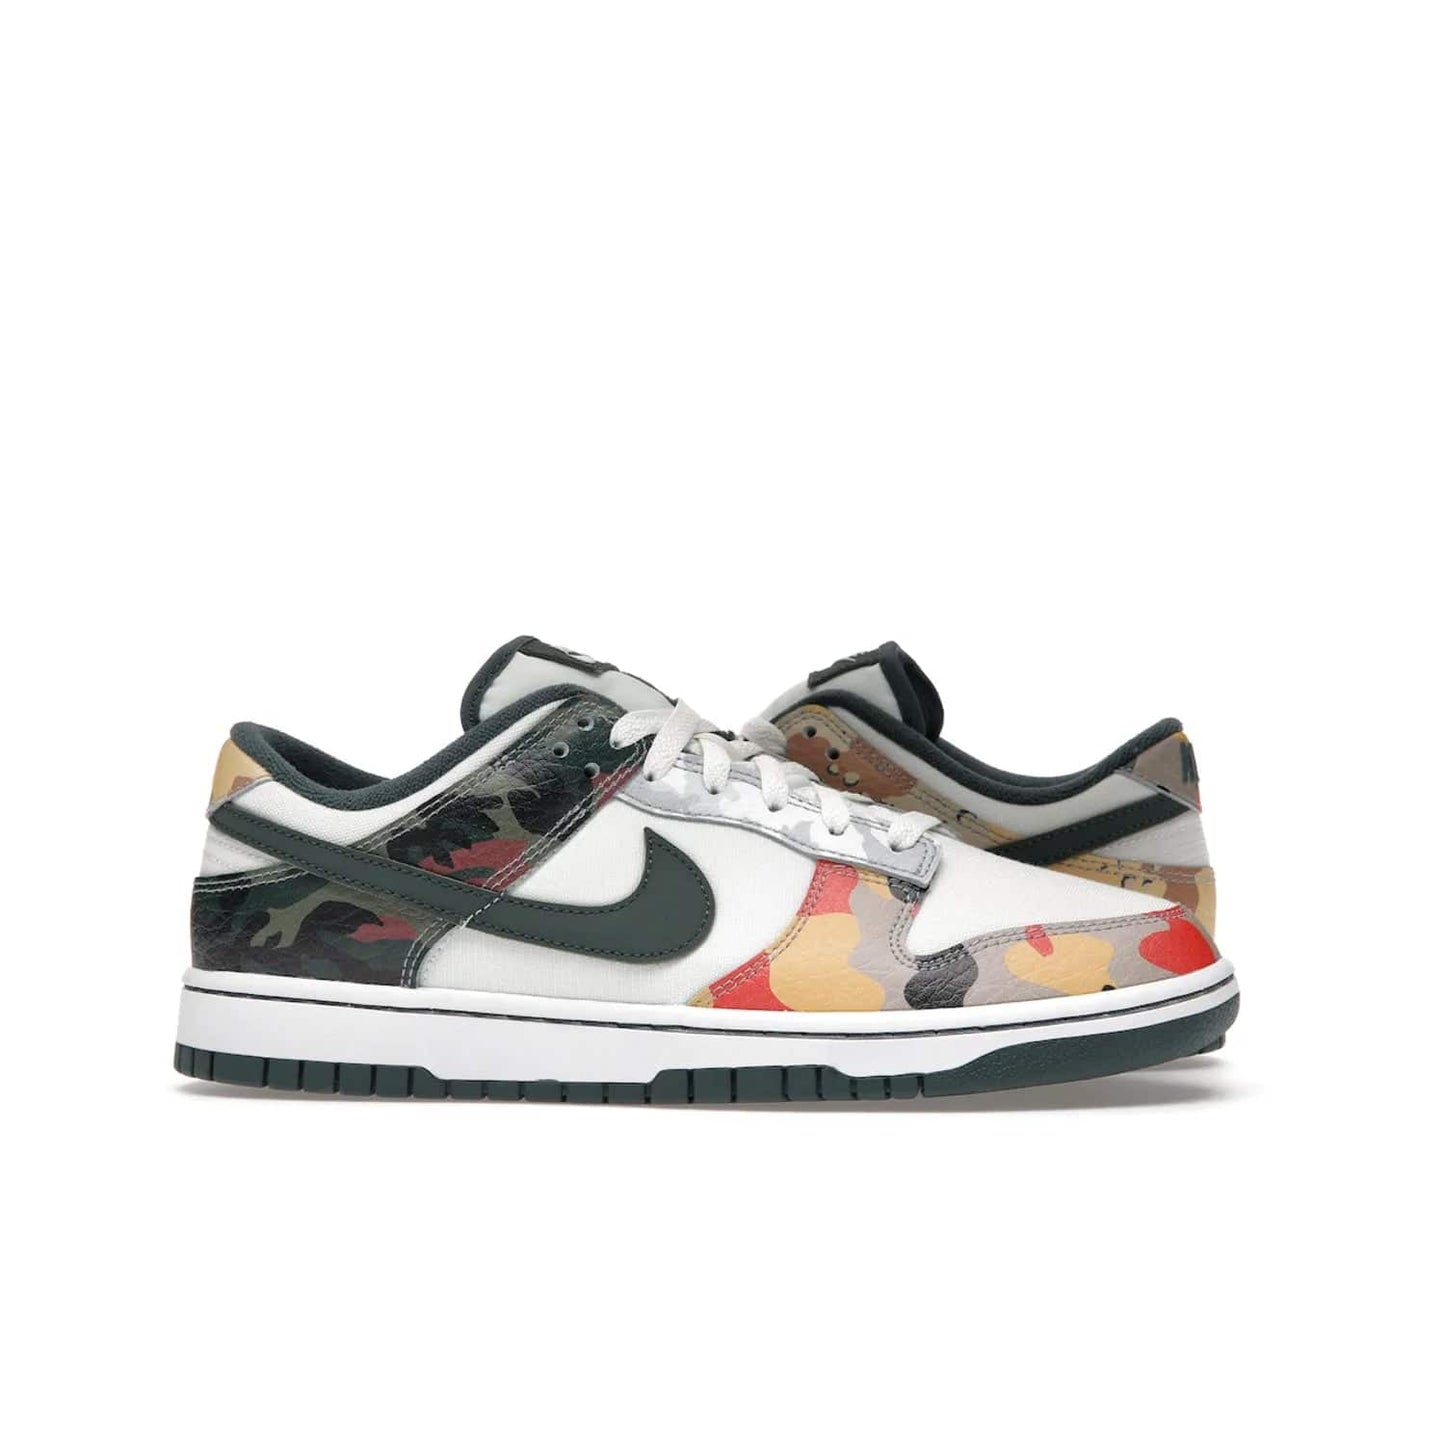 Nike Dunk Low SE Sail Multi-Camo - Image 2 - Only at www.BallersClubKickz.com - Classic design meets statement style in the Nike Dunk Low SE Sail Multi-Camo. White leather base with multi-color camo overlays, vibrant Nike Swooshes, and orange Nike embroidery. Get yours August 2021.